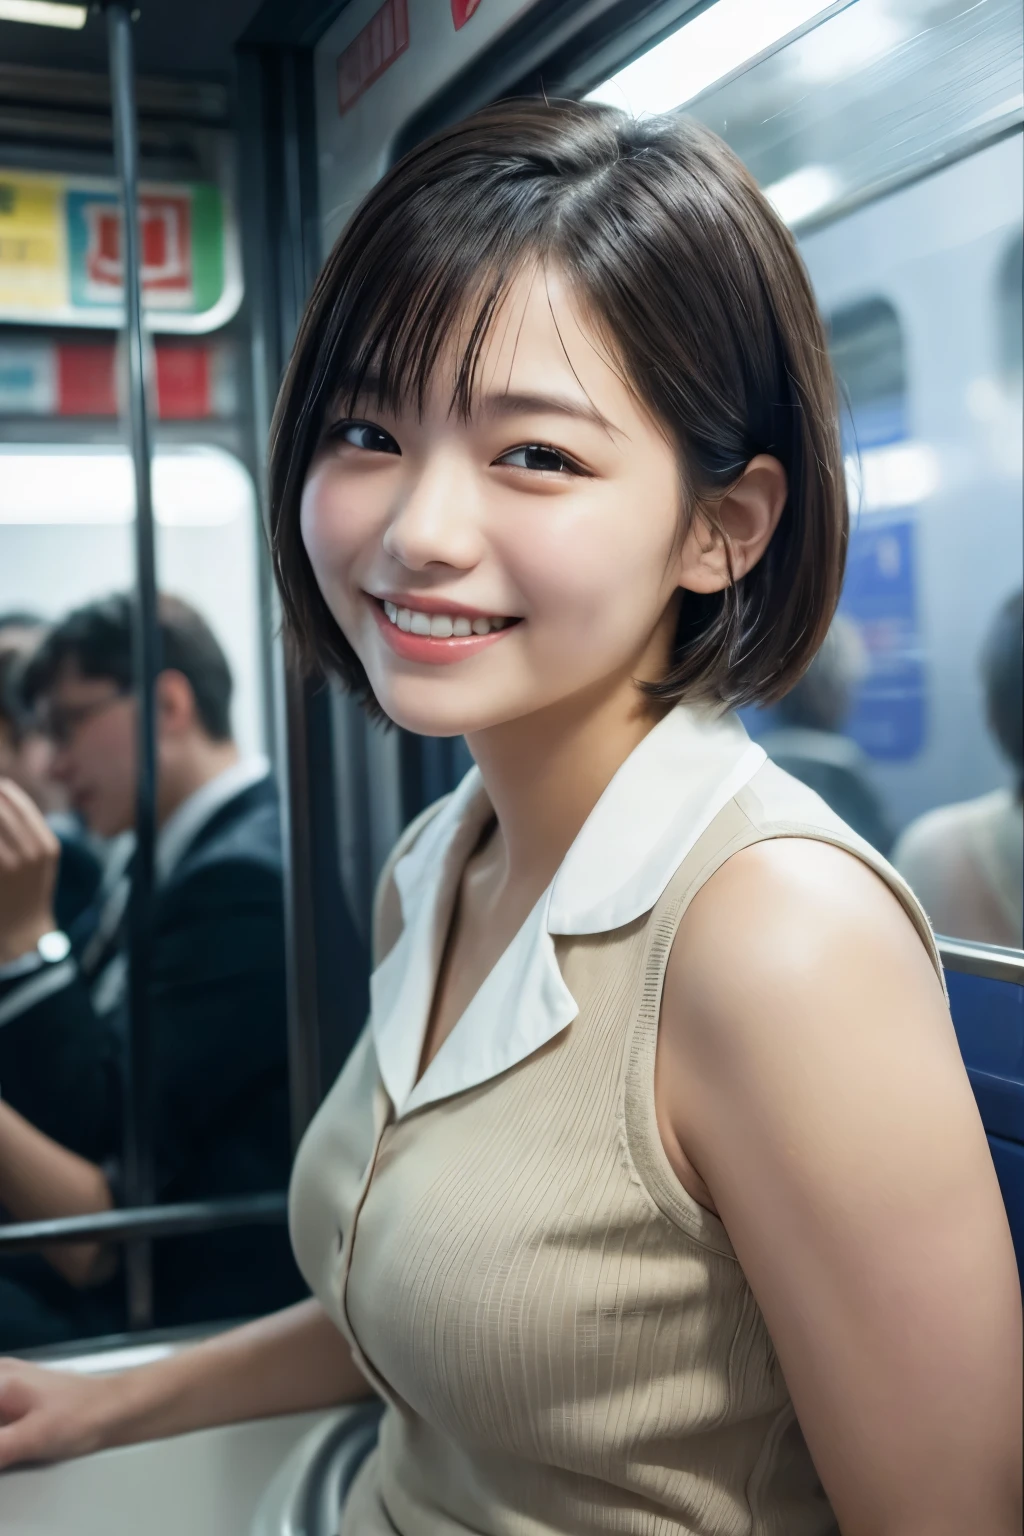 highest quality, masterpiece, Ultra-high resolution, (Reality: 1.4), Original photo, One woman, mature, happy smile, short hair, plump body, , Cinema Lighting, from below, High school girl on a crowded train, Wearing a uniform